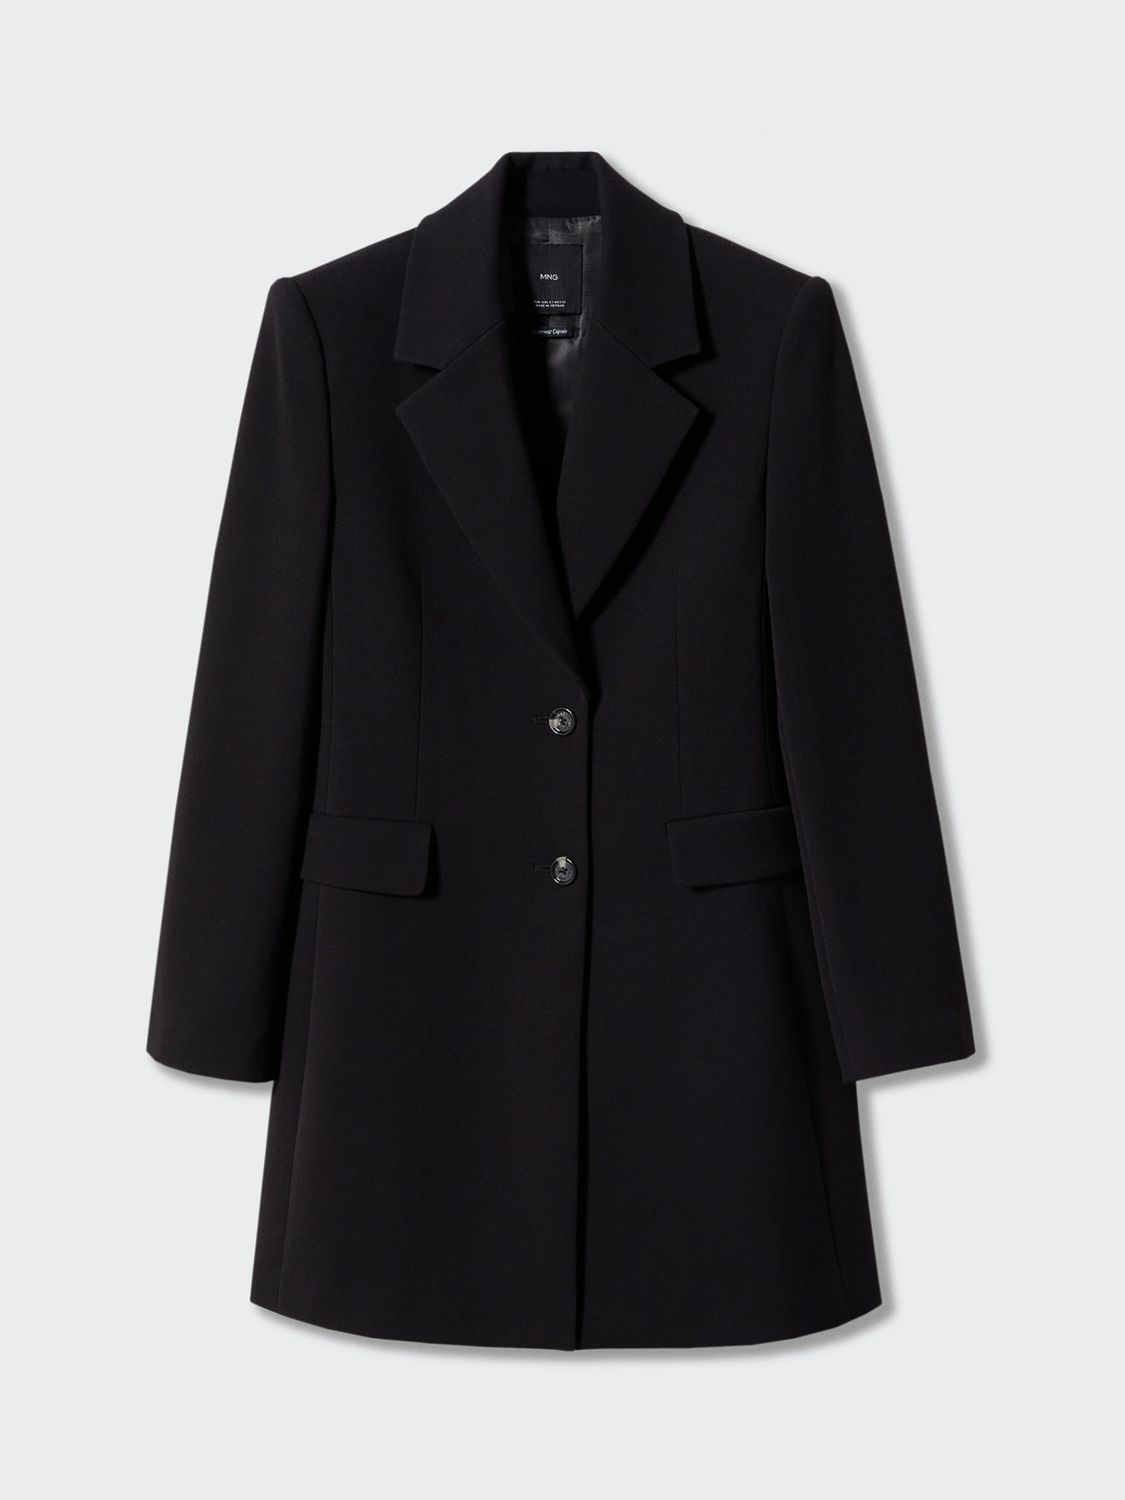 Mango Sugus Fitted Double Breasted Coat, Black at John Lewis & Partners